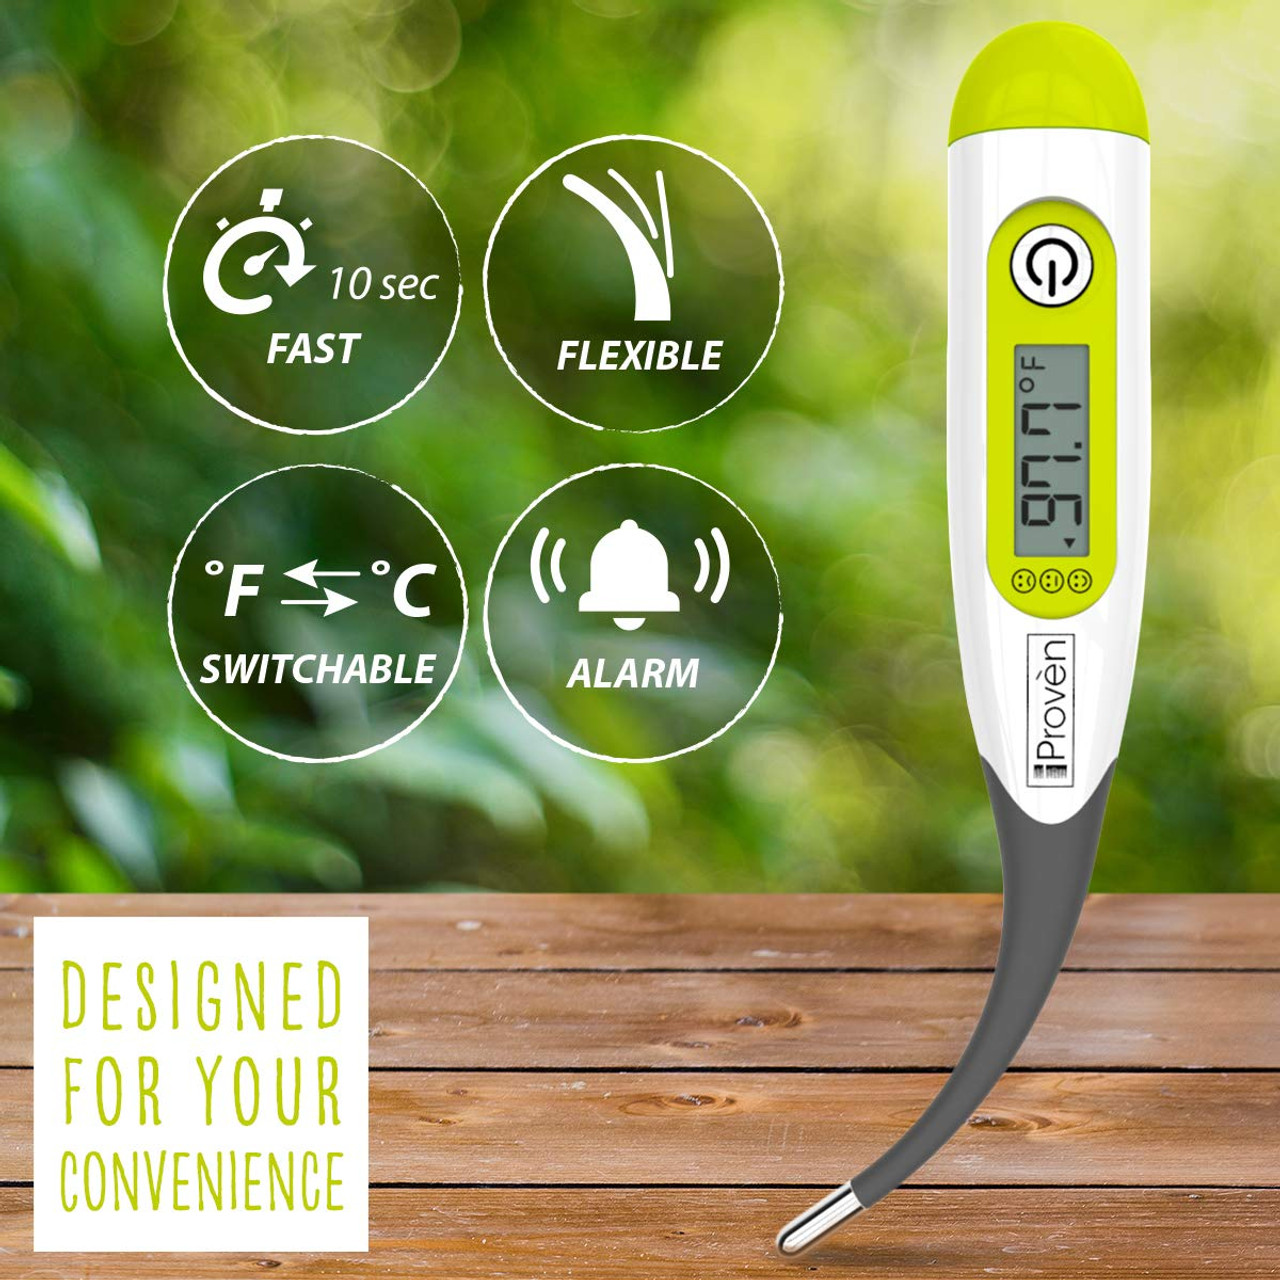 Digital Thermometer for Adults and Kids, Medical Oral Rectal